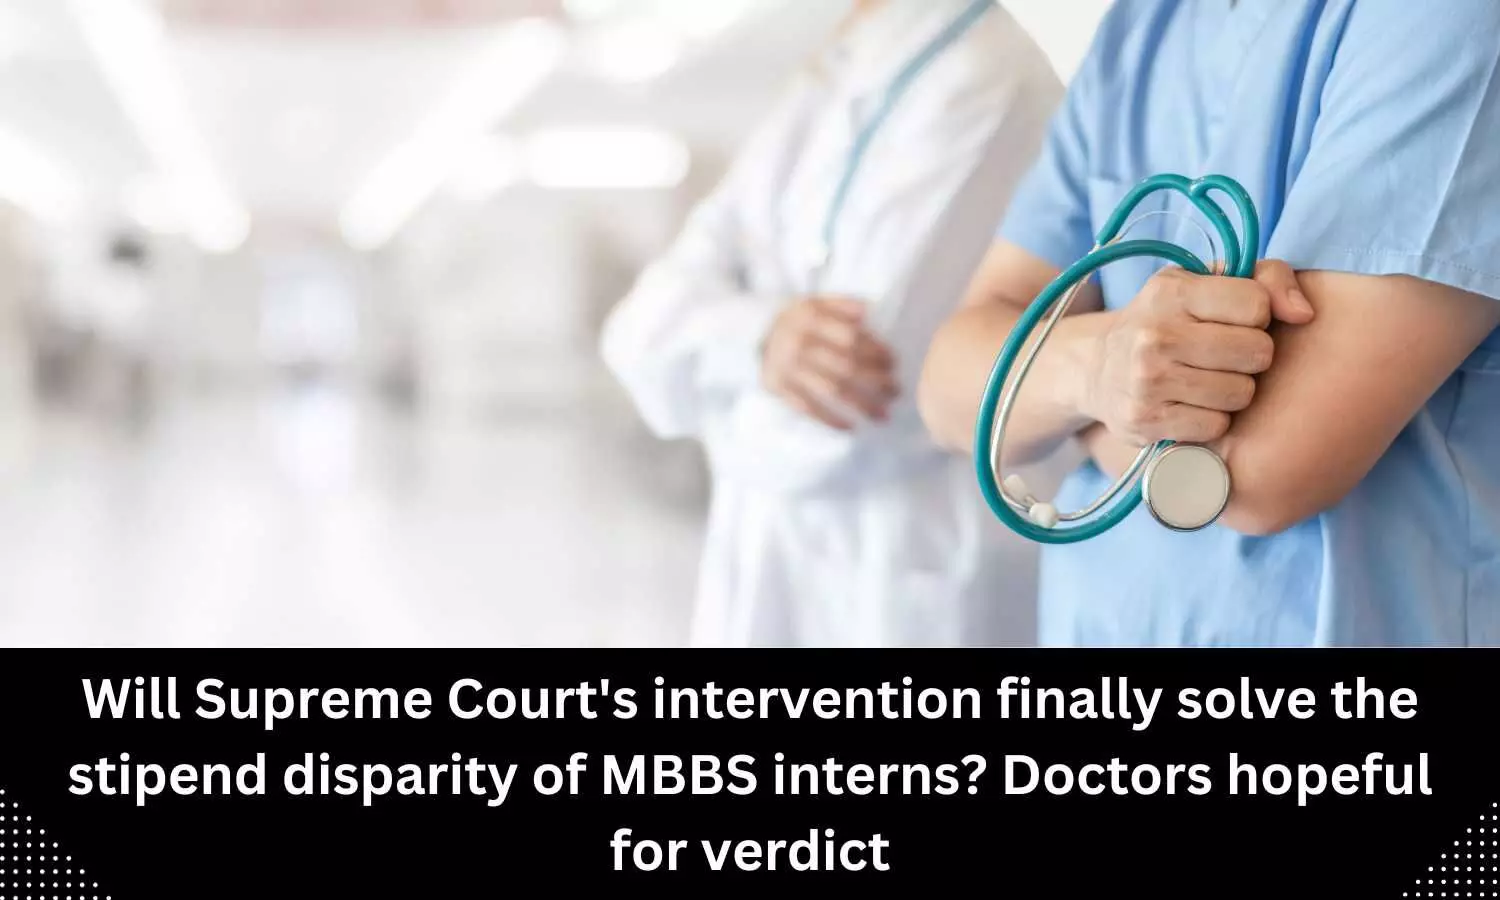 Will Supreme Courts intervention finally solve the stipend disparity of MBBS interns? Doctors hopeful for verdict